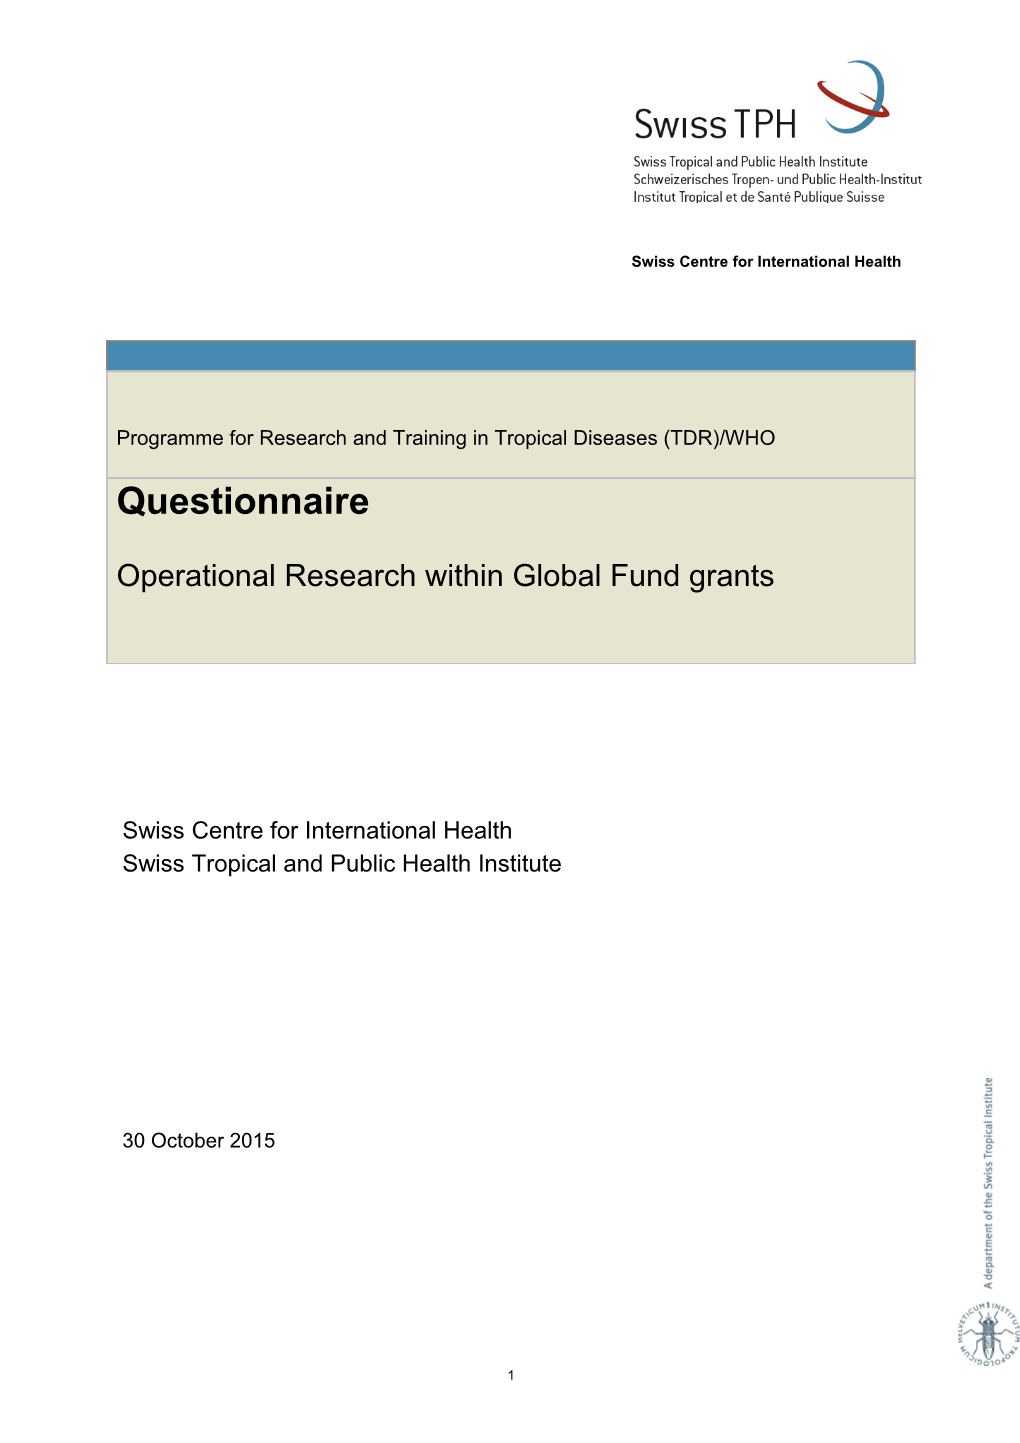 This Is a Template File of the Swiss Centre for International Health